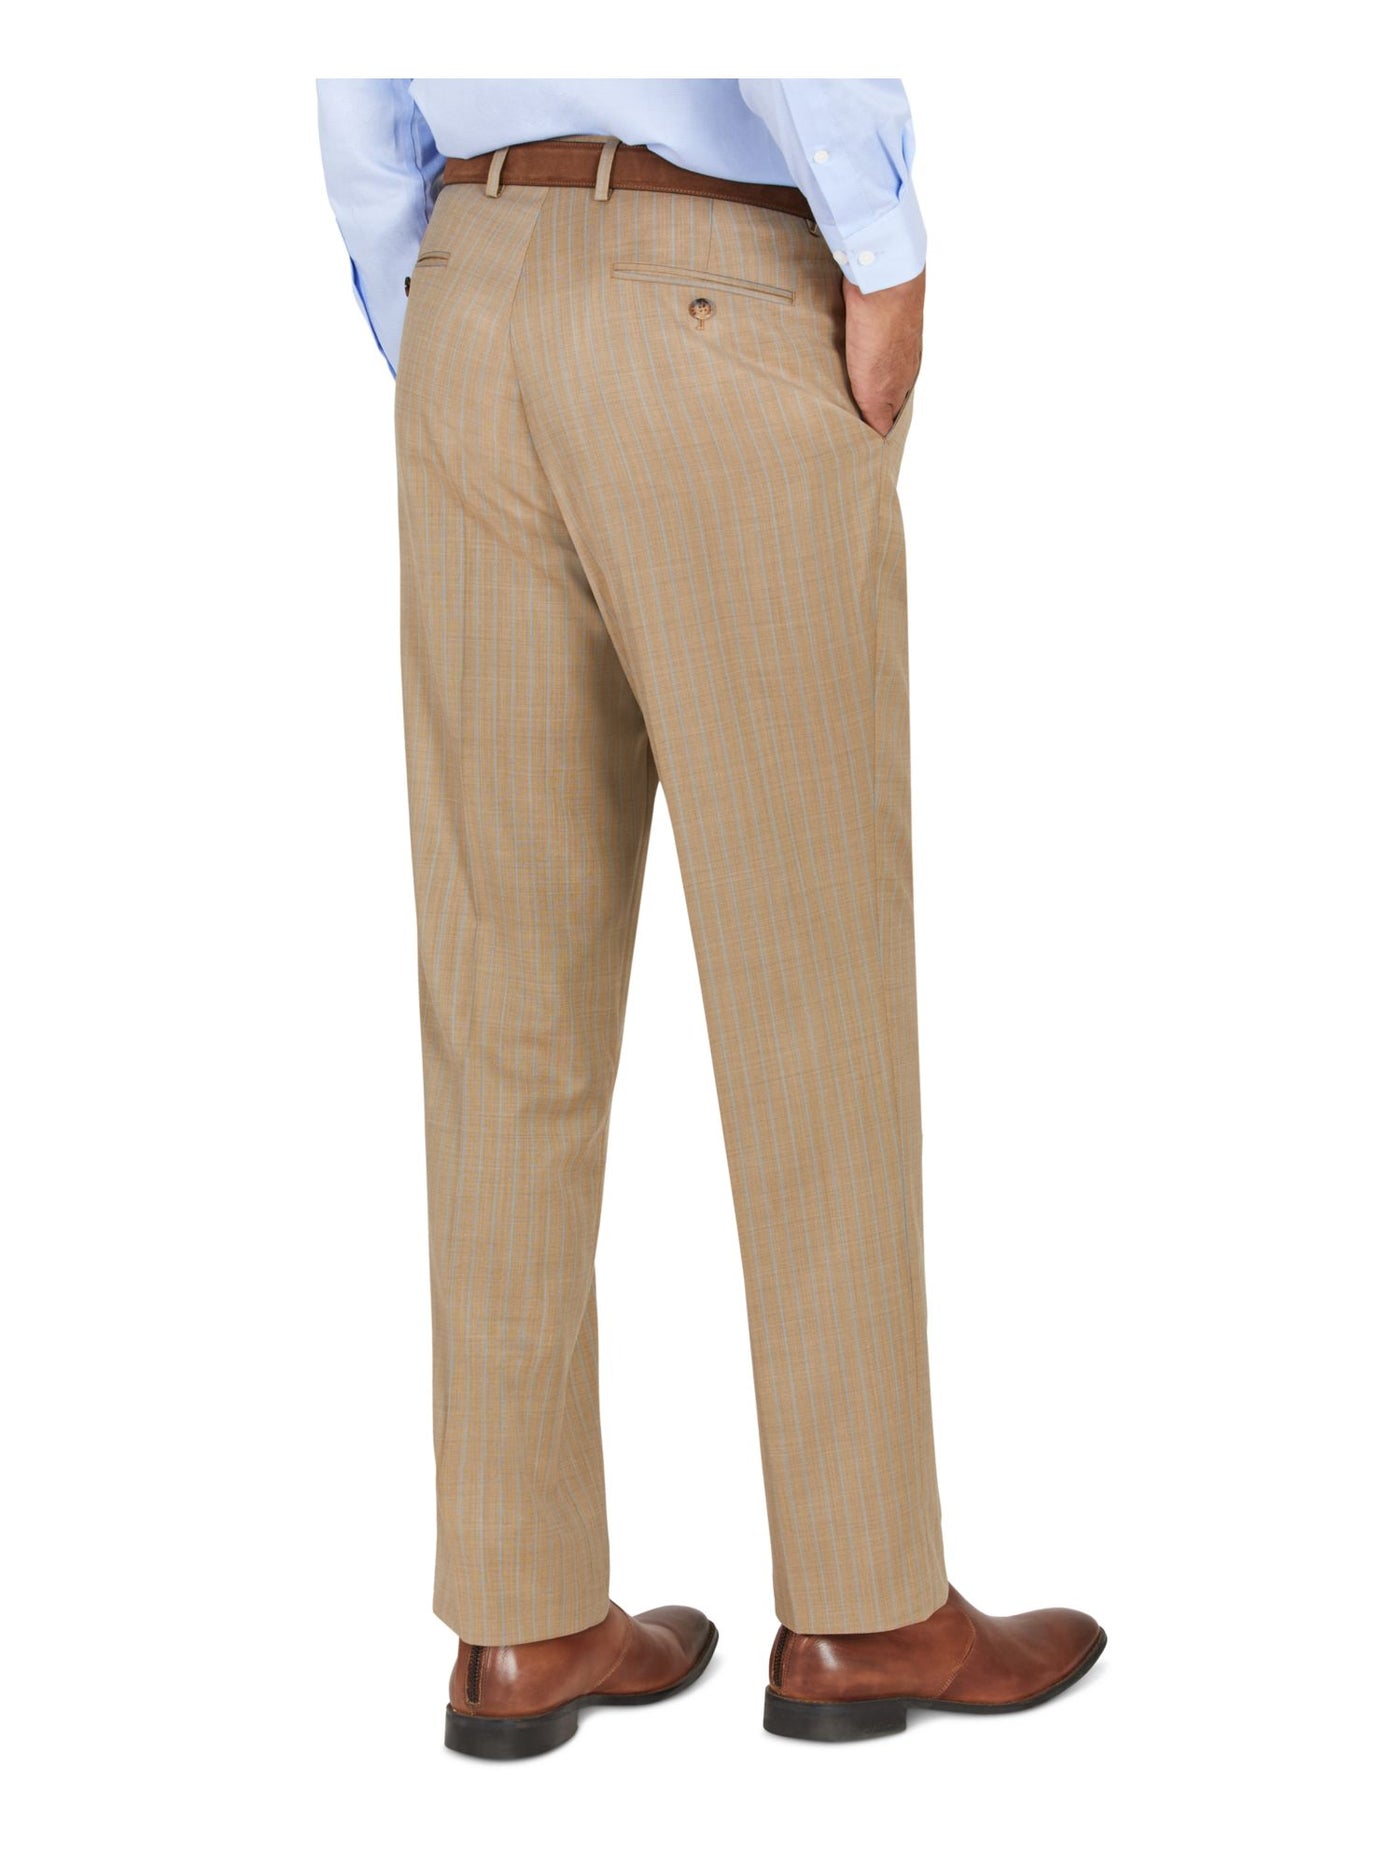 TAYION BY MONTEE HOLLAND Mens Beige Pleated, Striped Classic Fit Suit Separate Pants 30WX30L